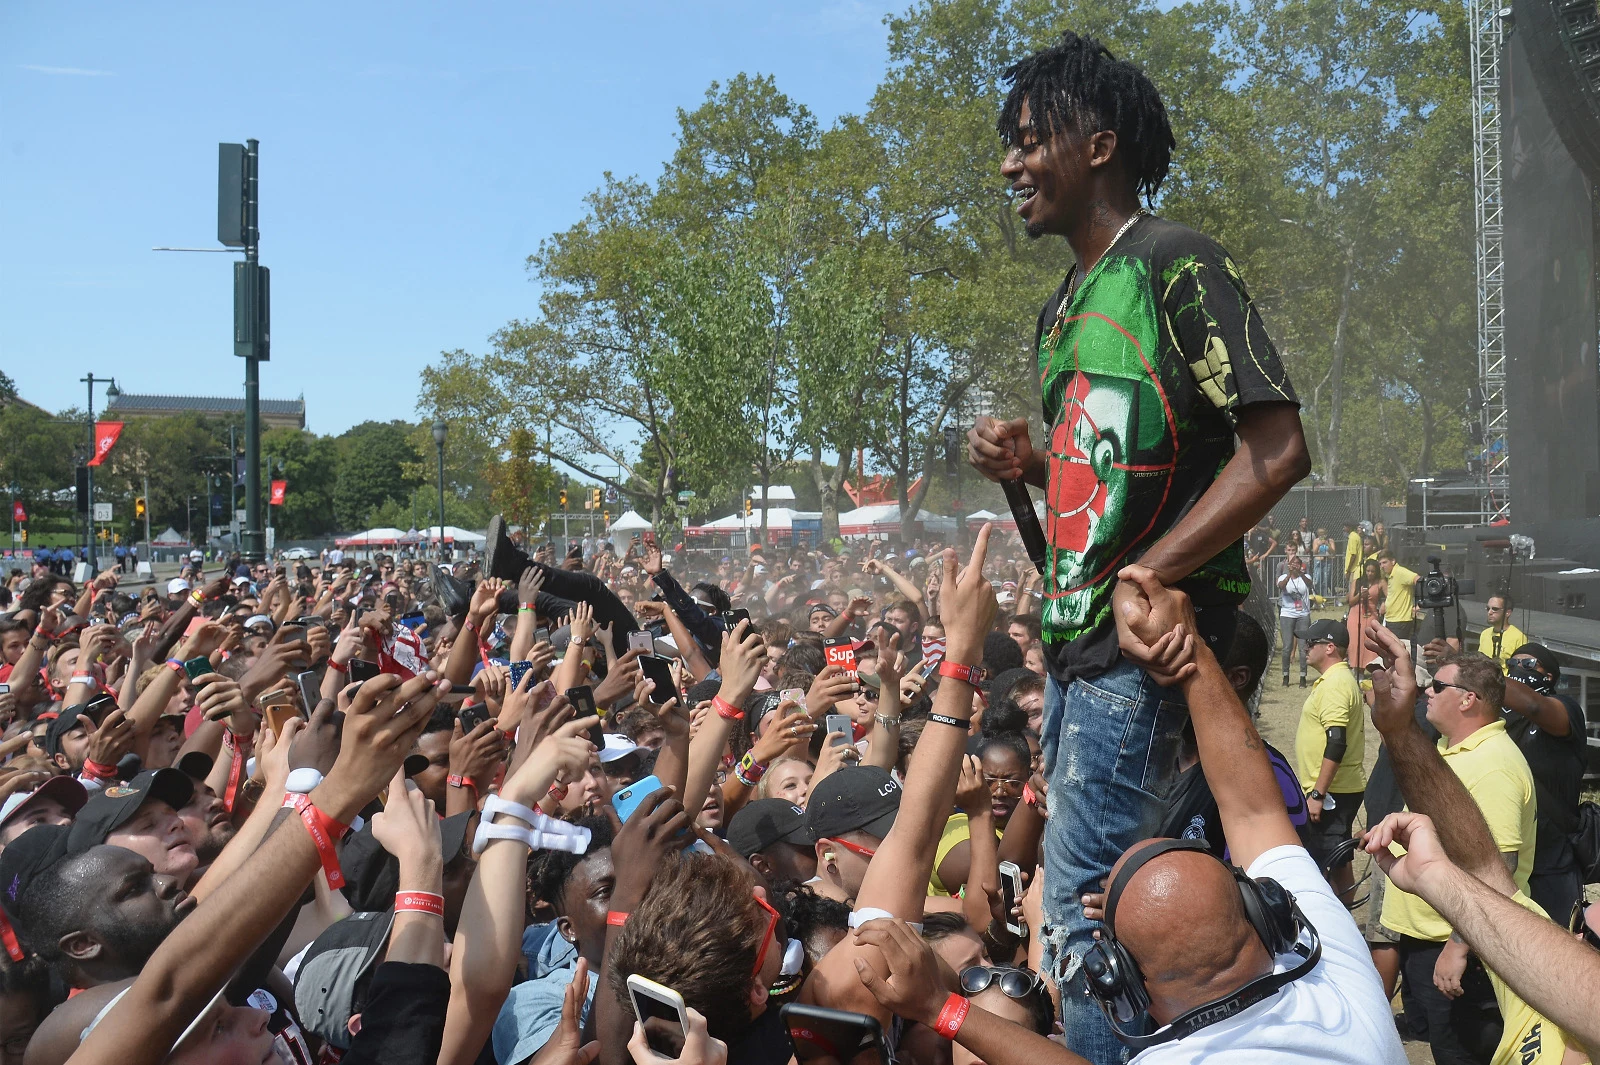 Playboi Carti Fans Need to Download This 45-Song Mixtape of His - XXL